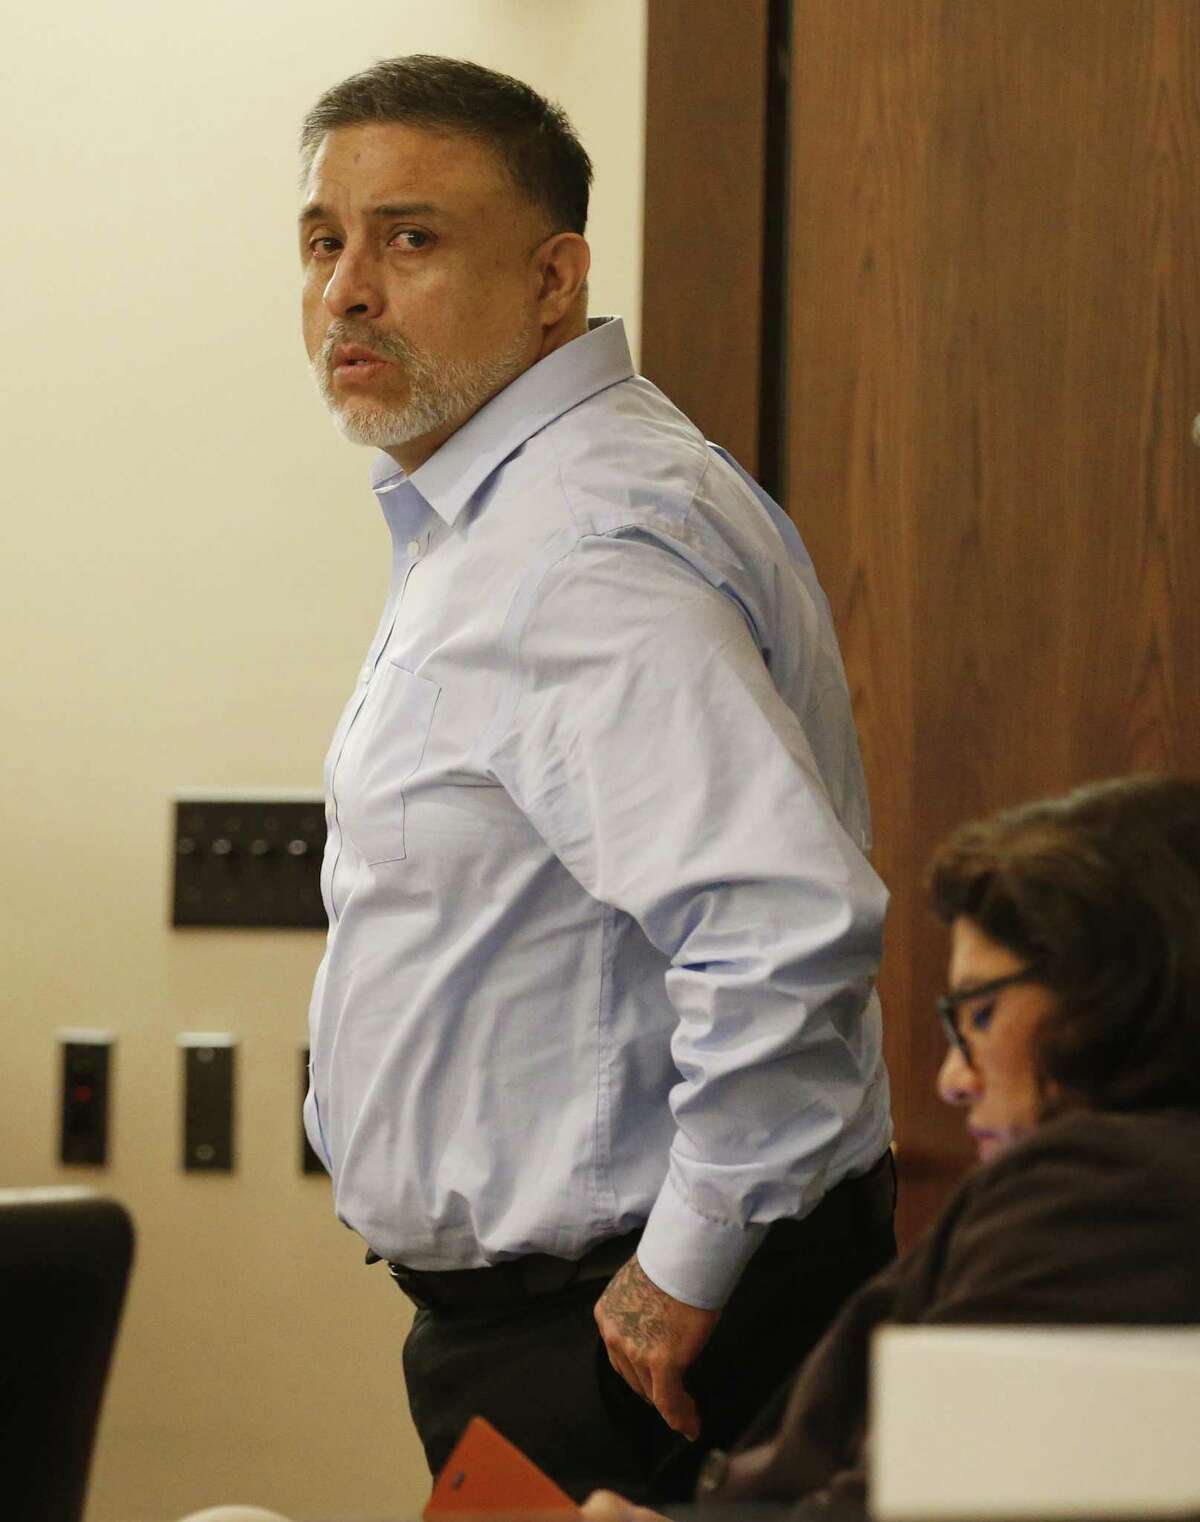 Testimony continues in the murder trial of Joel Soto (pictured), accused of setting a fire in his pickup to hide the fact that his two-year-old grandson, Jeremy Soto, was already dead, possibly from ingesting methamphetamine. The trial continued in 379th state District Court, presided by Judge Ron Rangel at Cadena-Reeves Justice Center on Thursday, June 8, 2017. (Kin Man Hui/San Antonio Express-News)